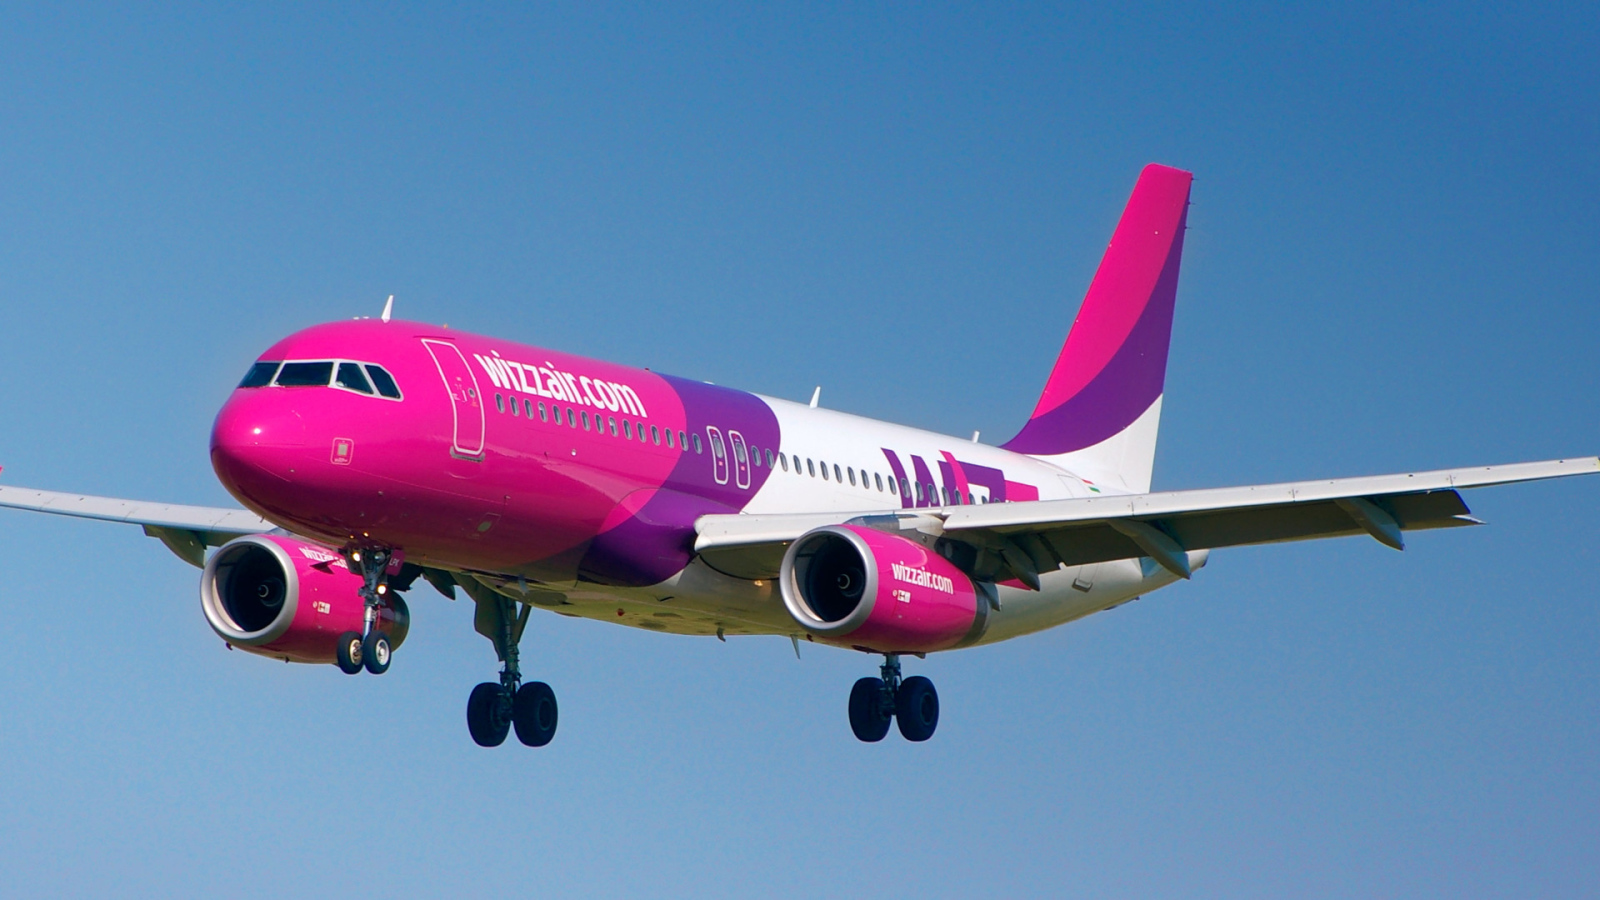 Airbus aircraft airline Wizz Air landing at London airport